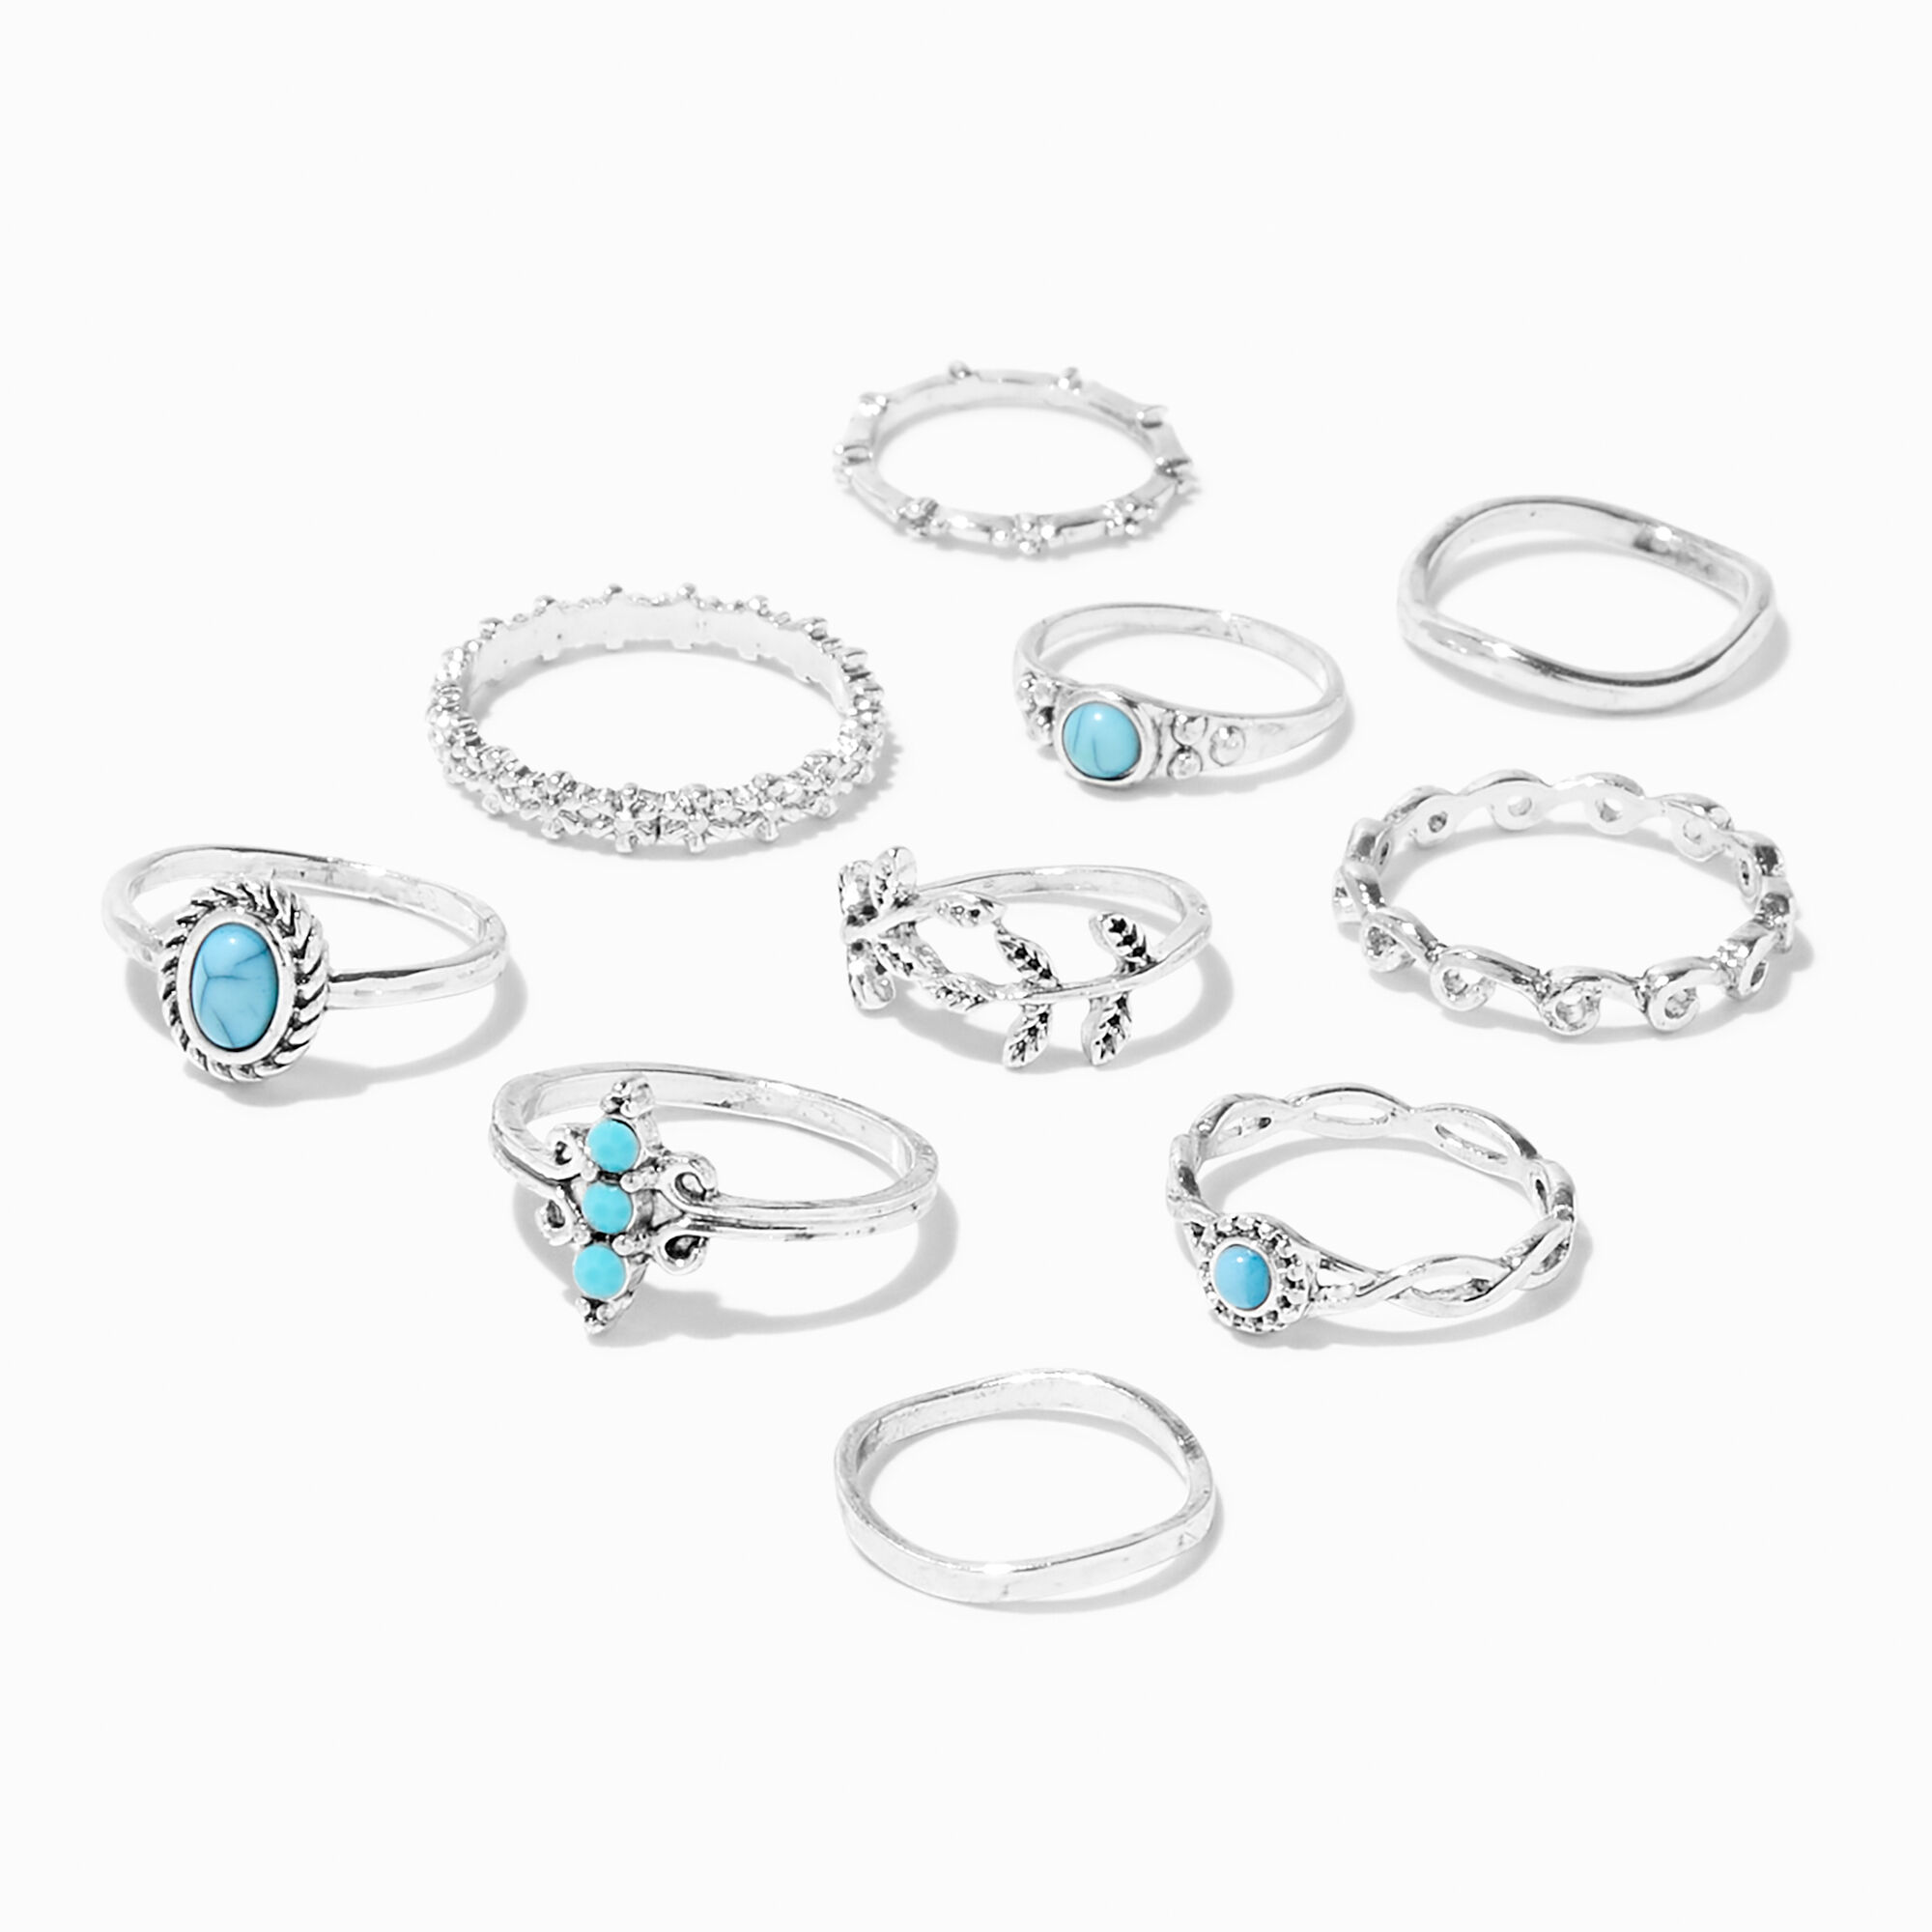 View Claires SilverTone Mixed Leaf Filigree Rings 10 Pack Turquoise information